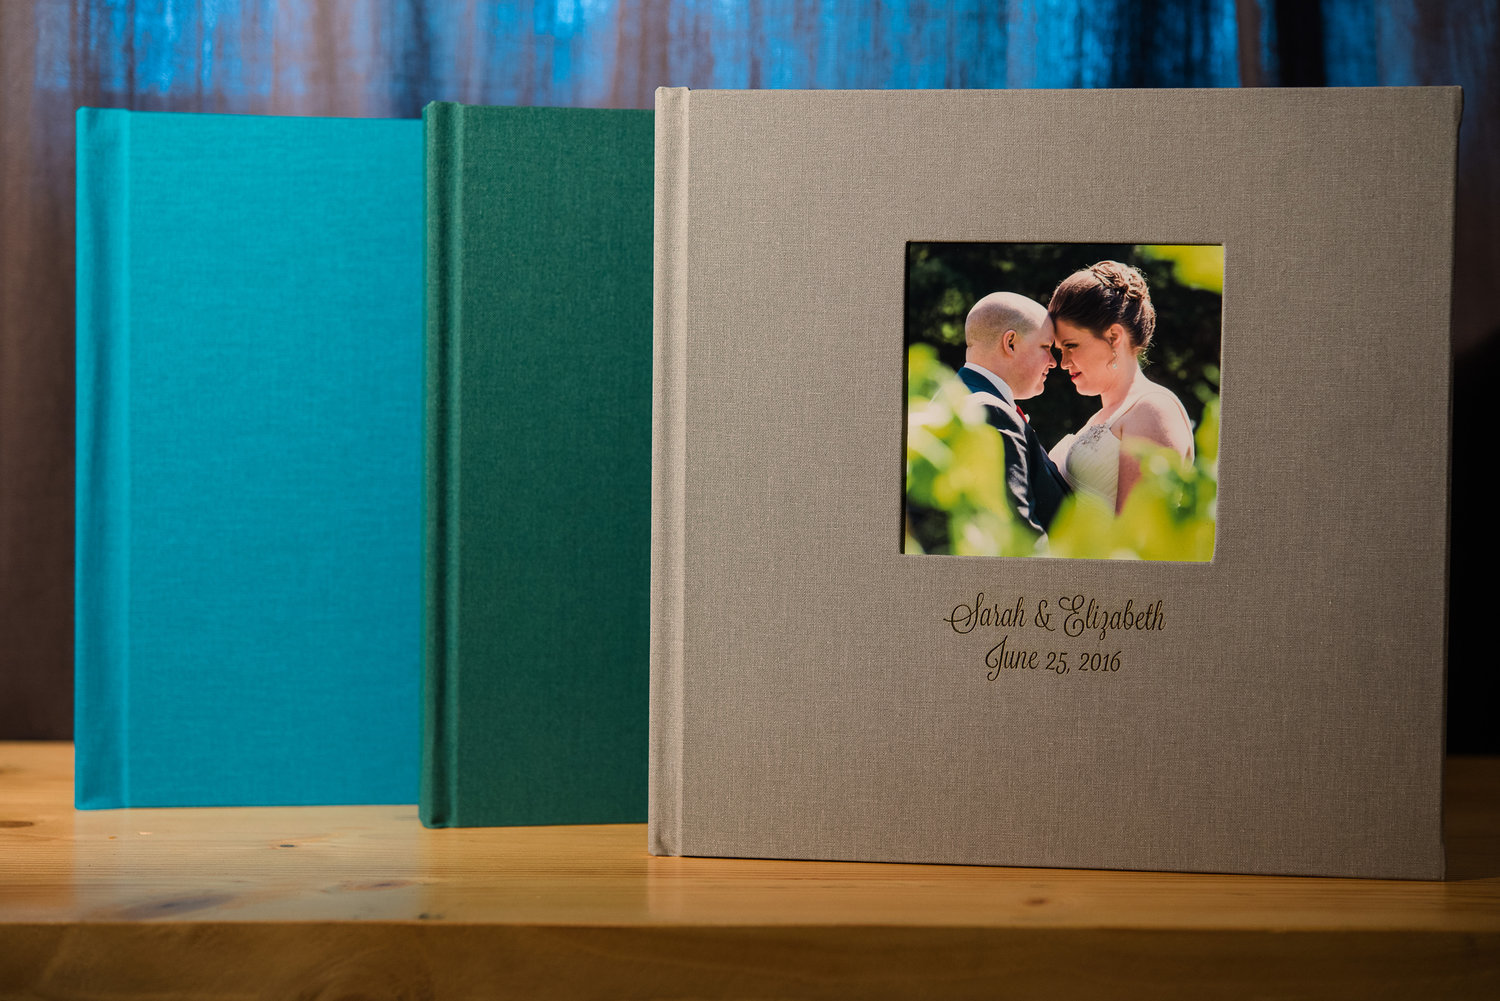 wedding album prices and details for seattle wedding photographer